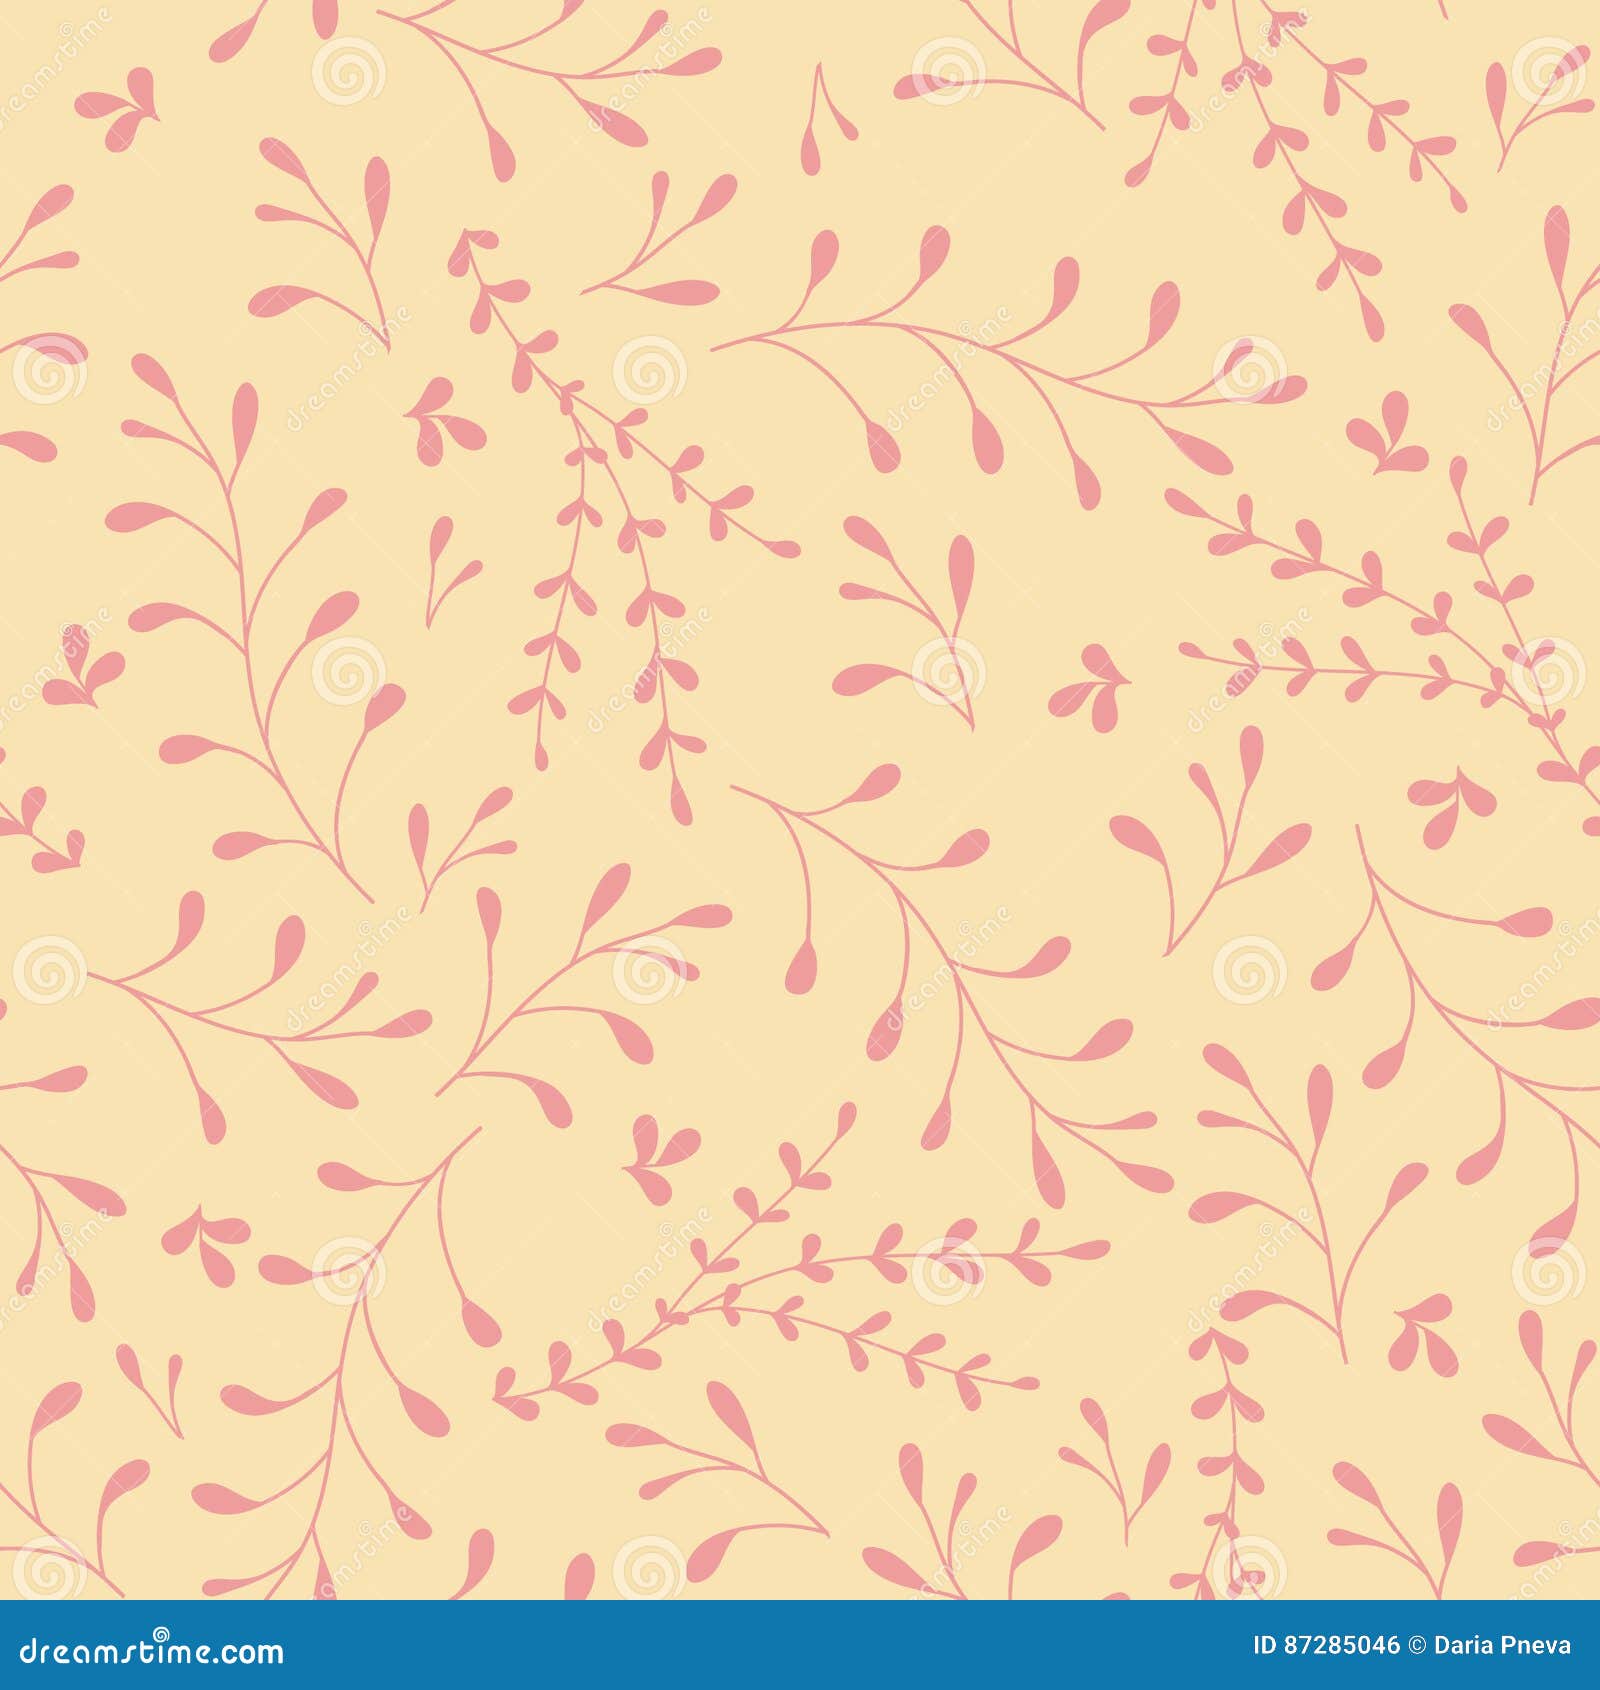 whimsical leaves and branches seamless pattern yellow.